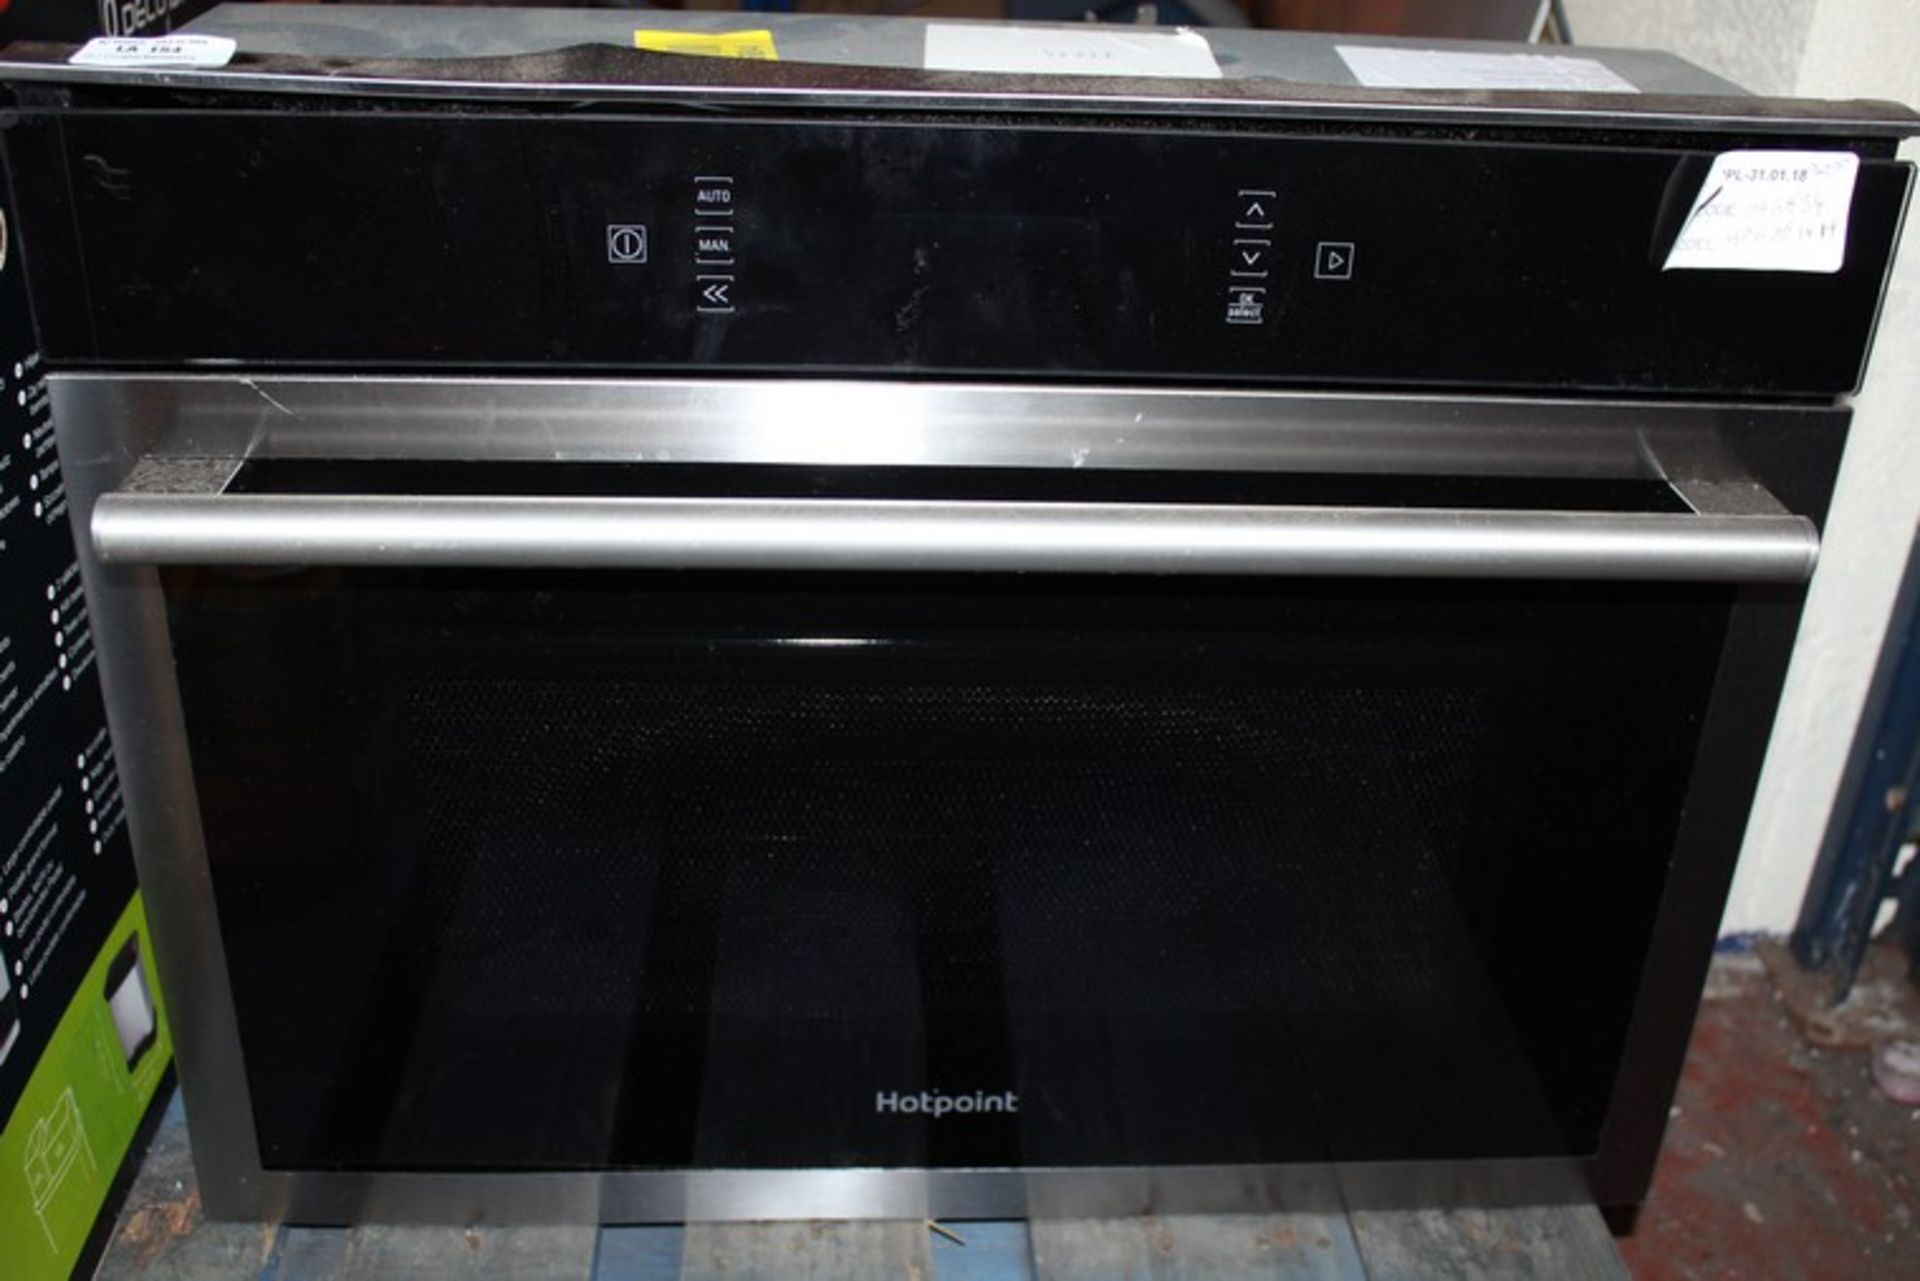 1 x HOTPOINT MICROWAVE OVEN RRP £420 (31.01.18) *PLEASE NOTE THAT THE BID PRICE IS MULTIPLIED BY THE